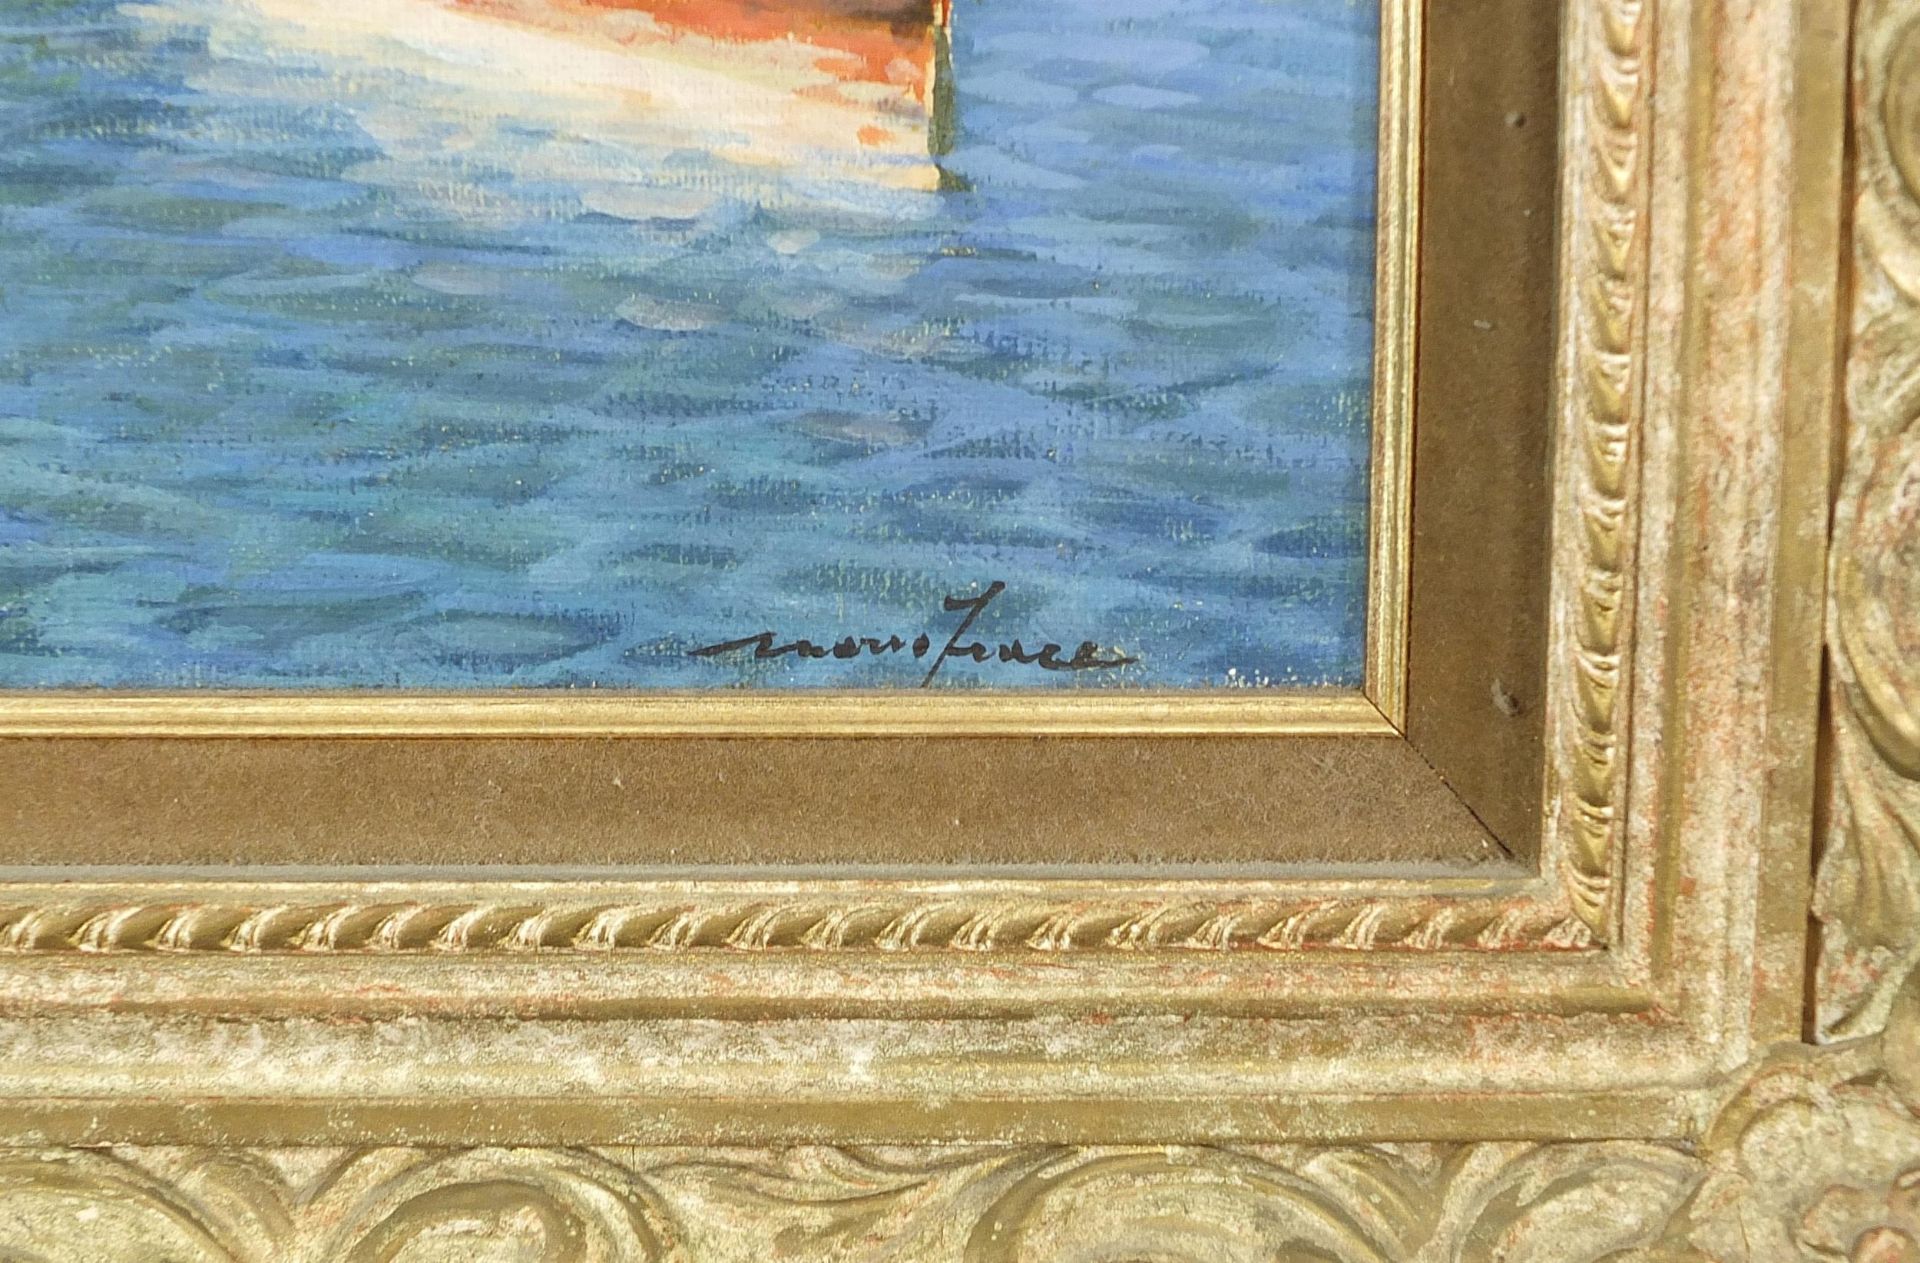 Mario Irace - Moored boats beside villas, Italian oil on canvas, with booklet, mounted and framed, - Image 3 of 6